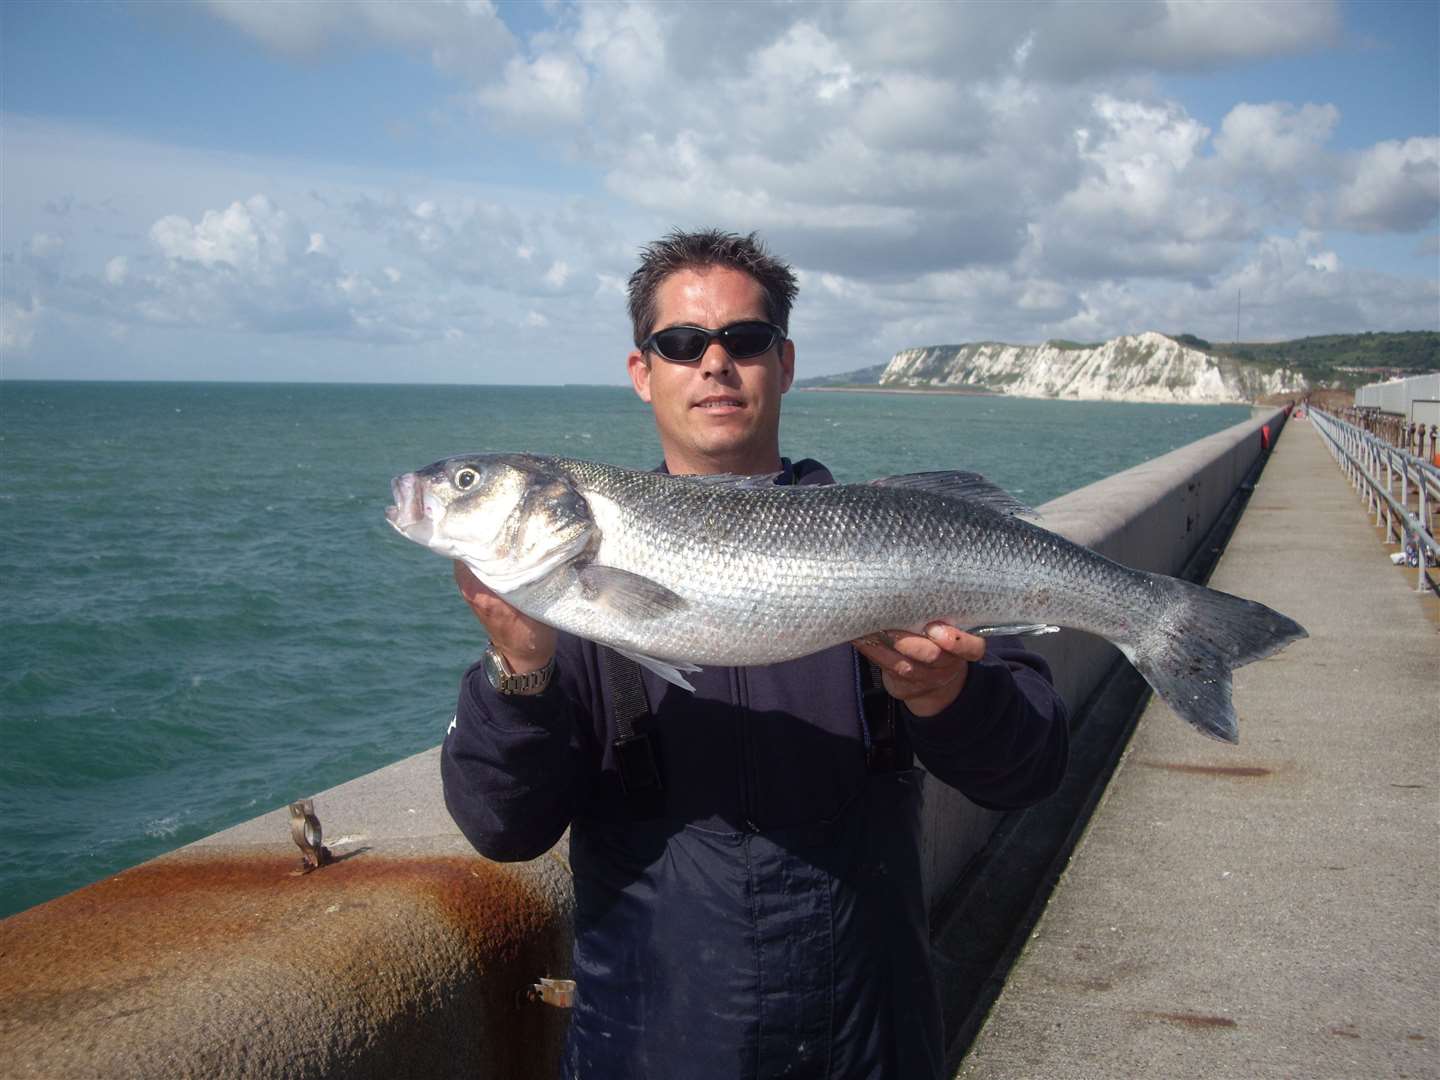 Brian Price with a 10lb 5oz bass caught off the Admiralty Pier in Dover Picture: Alan Yates